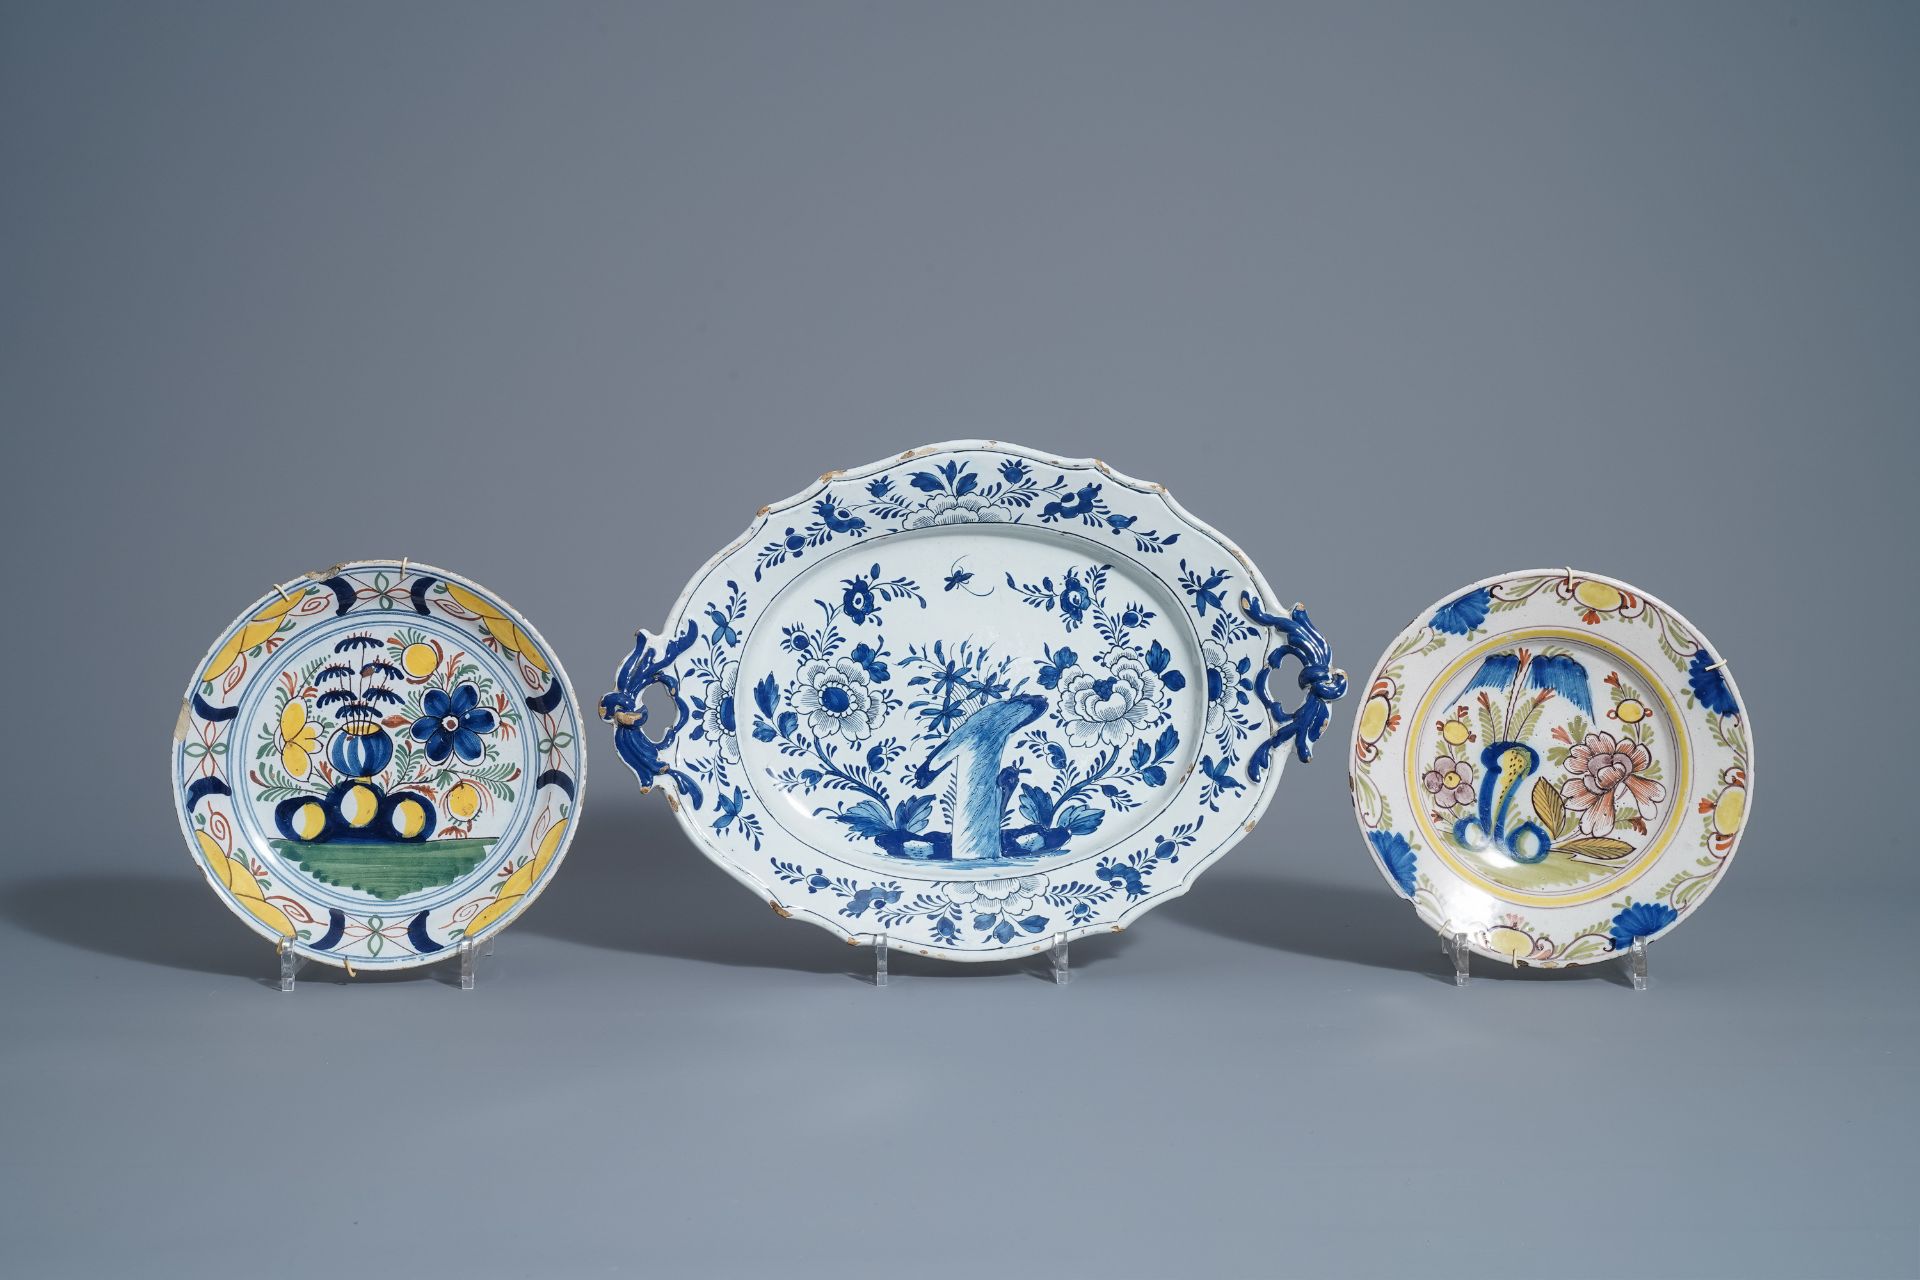 Twelve polychrome and blue and white Dutch Delft plates and an oval tray, 18th C. - Image 12 of 13